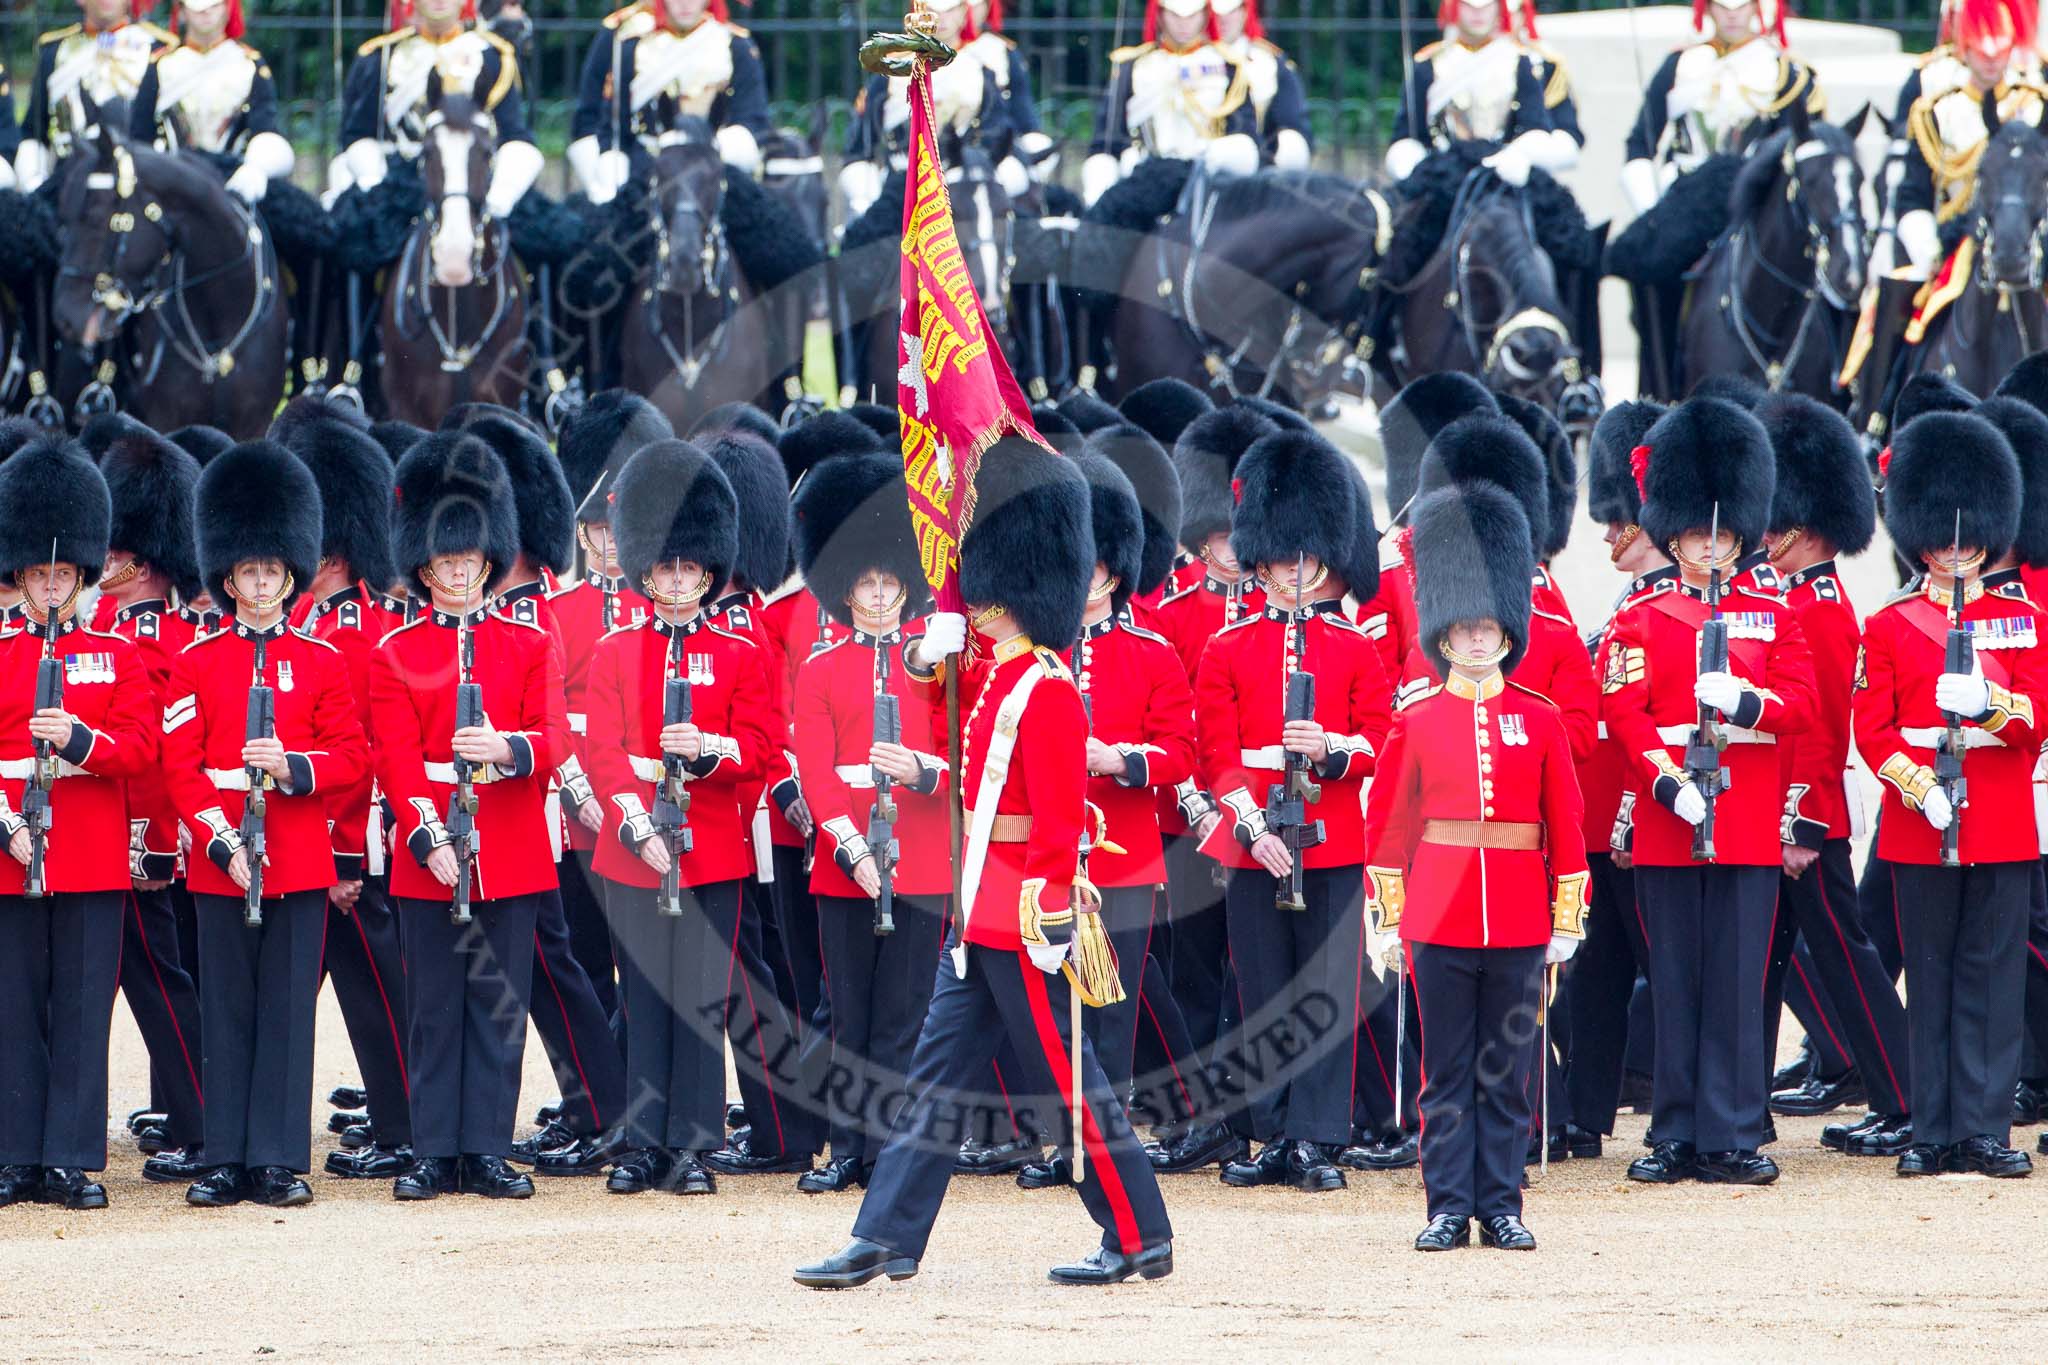 Trooping the Colour 2012: The Ensign, Second Lieutenant Hugo C Codrington, is trooping the Colour along No. 2 Guard, 1st Battalion Coldstream Guards, whilst the Escort to the Colour, No. 1 Guard, is marching between the two lines of guardsmen..
Horse Guards Parade, Westminster,
London SW1,

United Kingdom,
on 16 June 2012 at 11:27, image #356